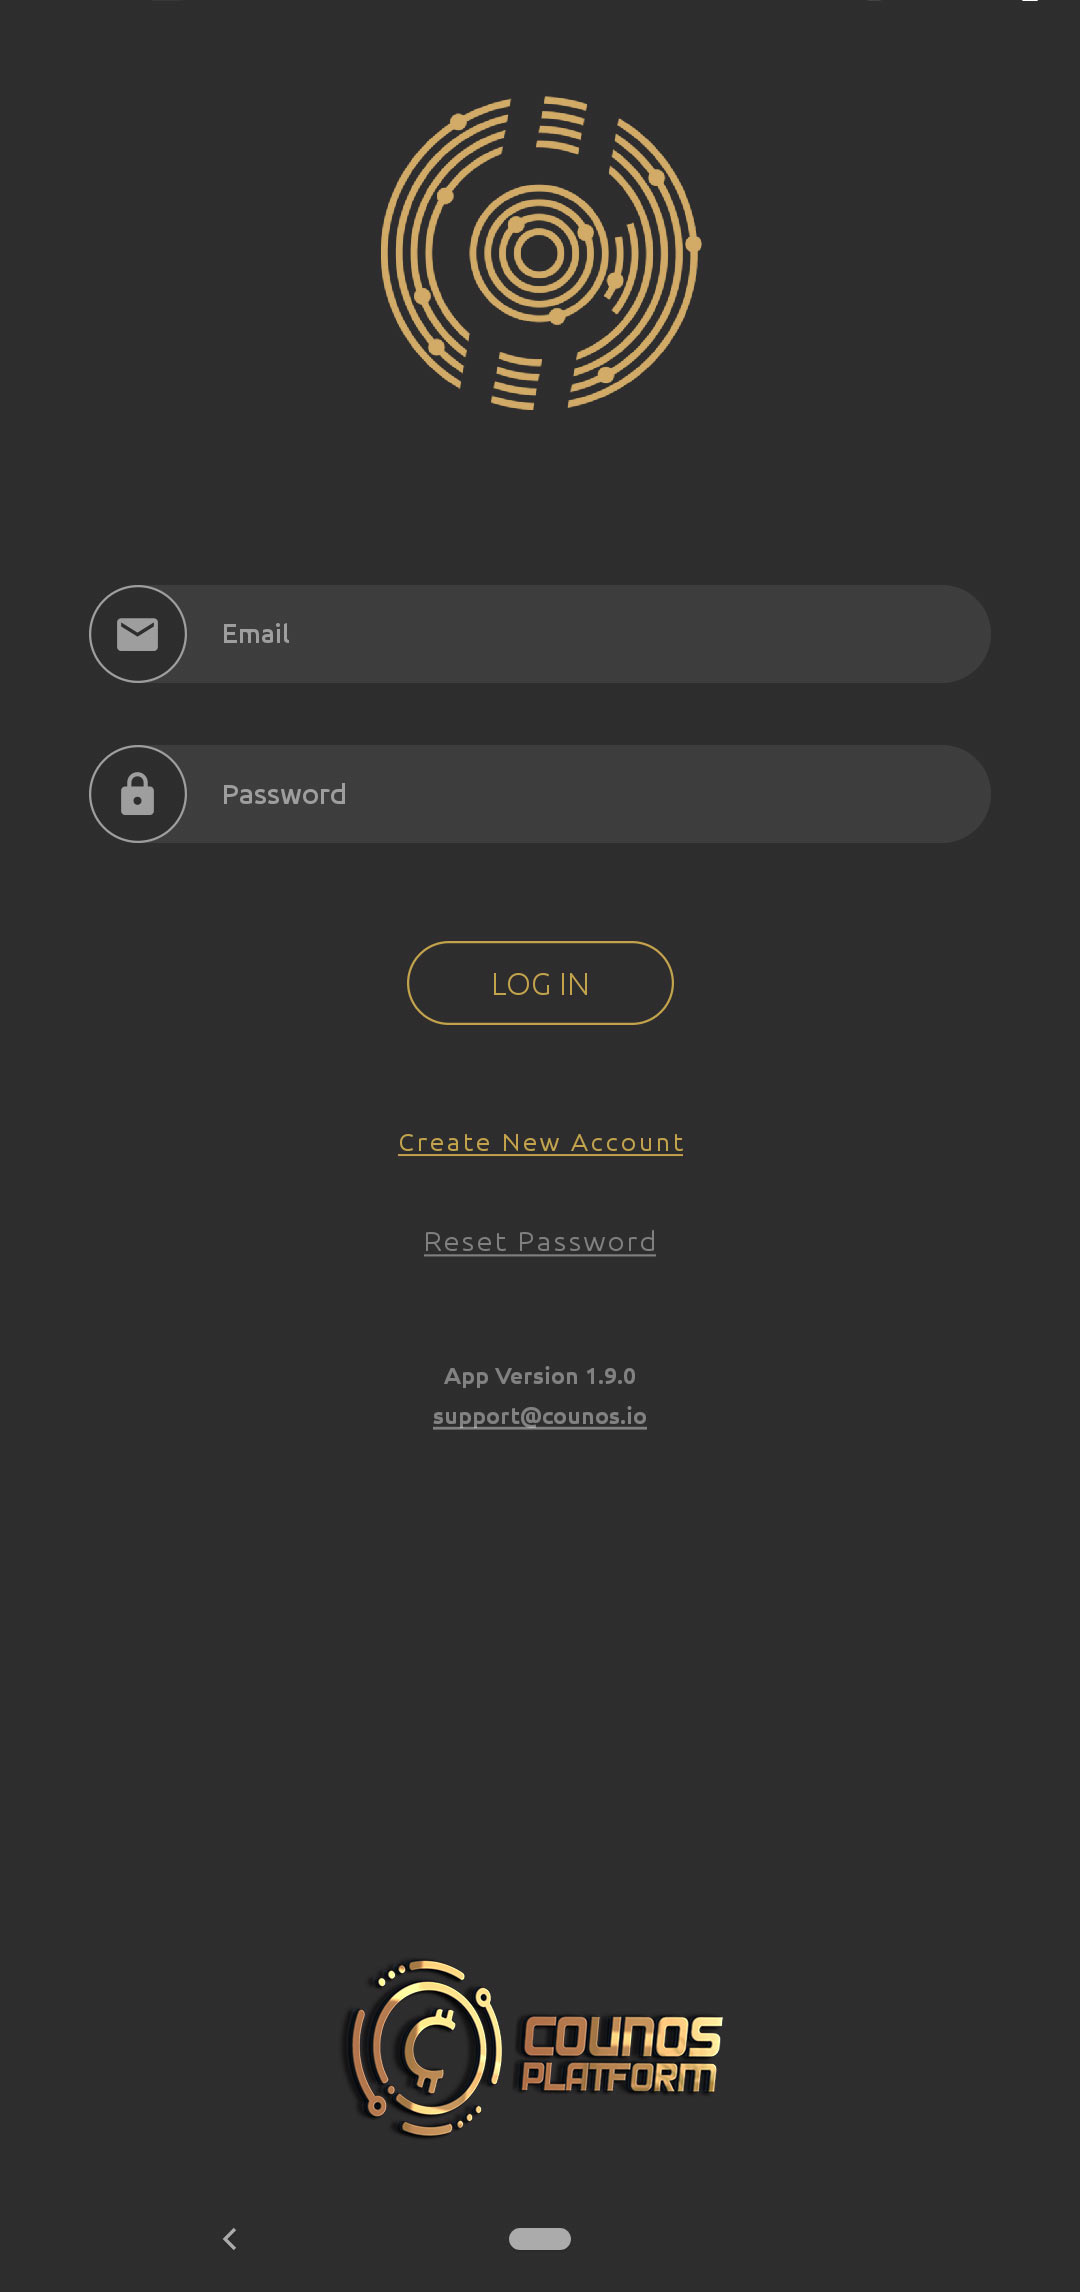 After the app is installed, in order to register in it, tap on Create New Account. 